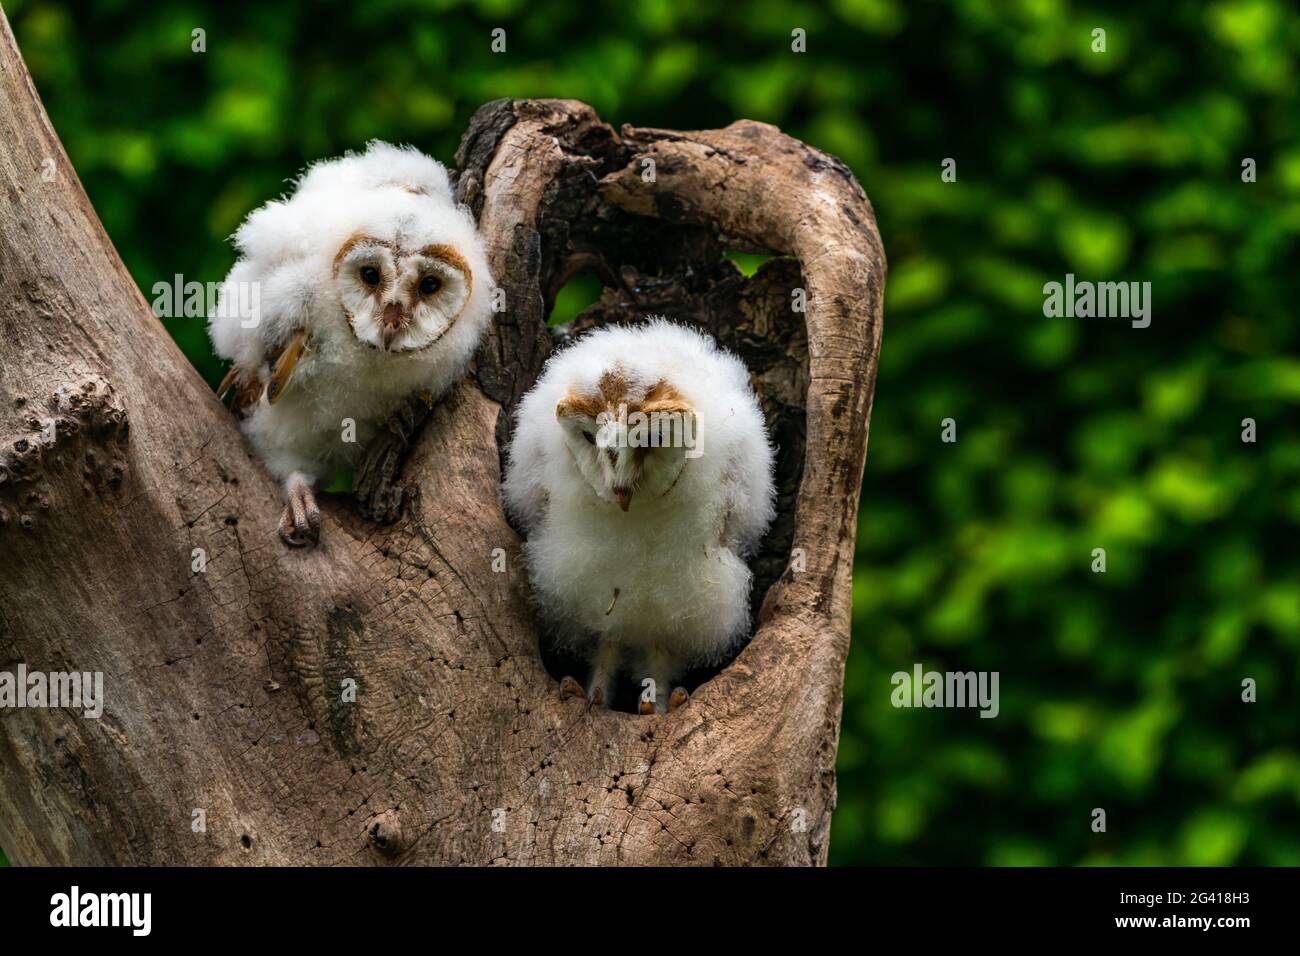 Two Barn owl chicks (Tyto alba) perched on a tree trunk Stock Photo